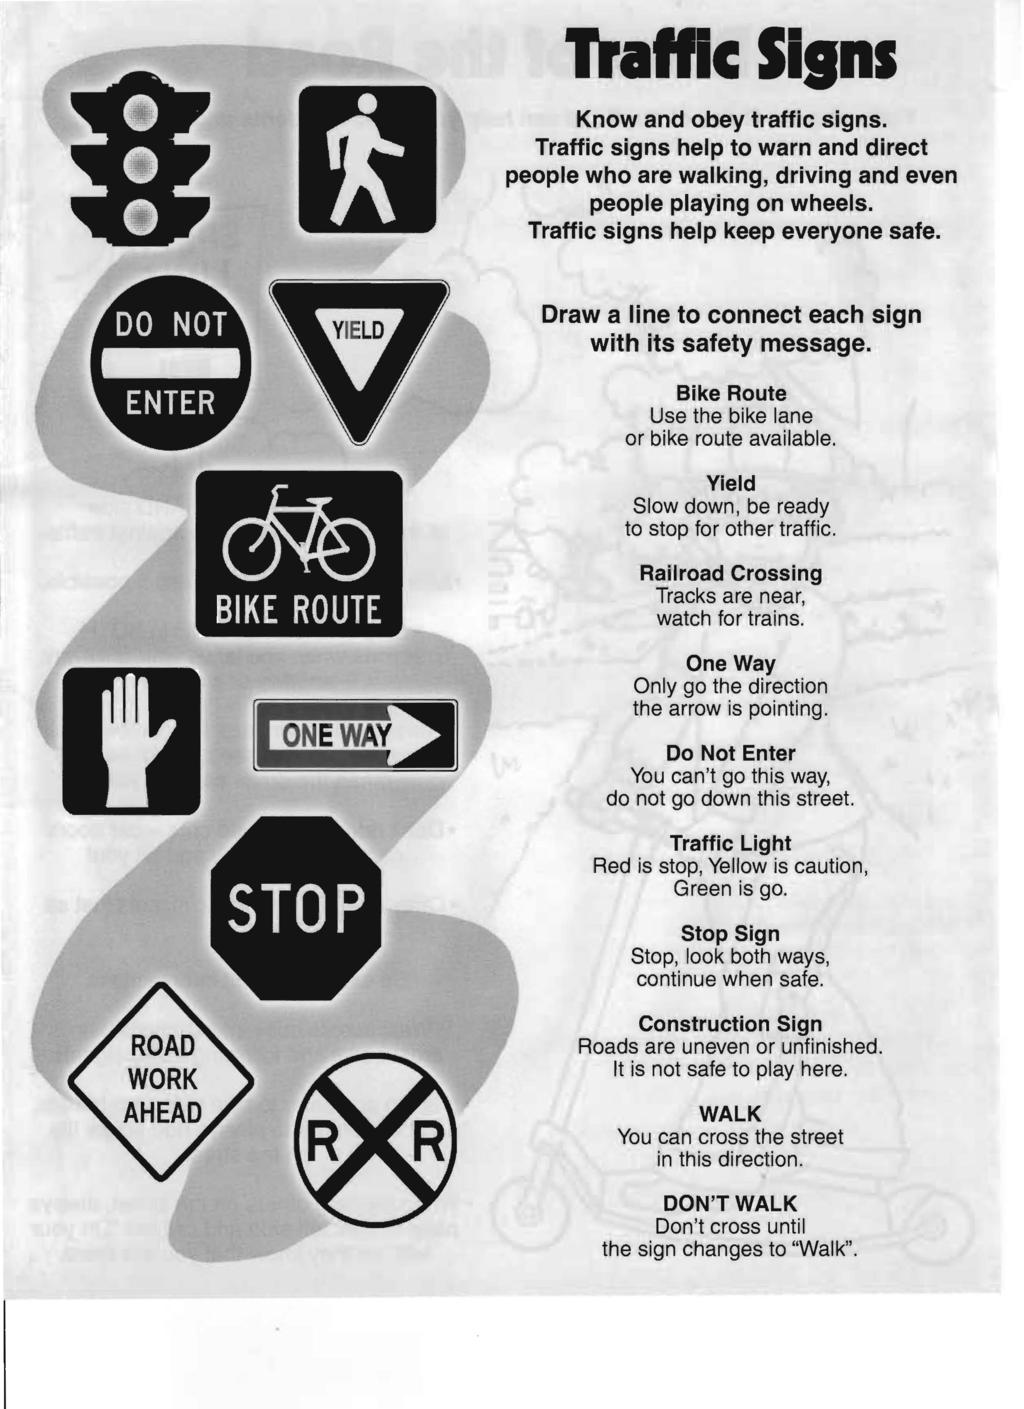 trame Sllns Know and obey traffic signs. Traffic signs help to warn and direct people who are walking, driving and even people playing on wheels. Traffic signs help keep everyone safe.